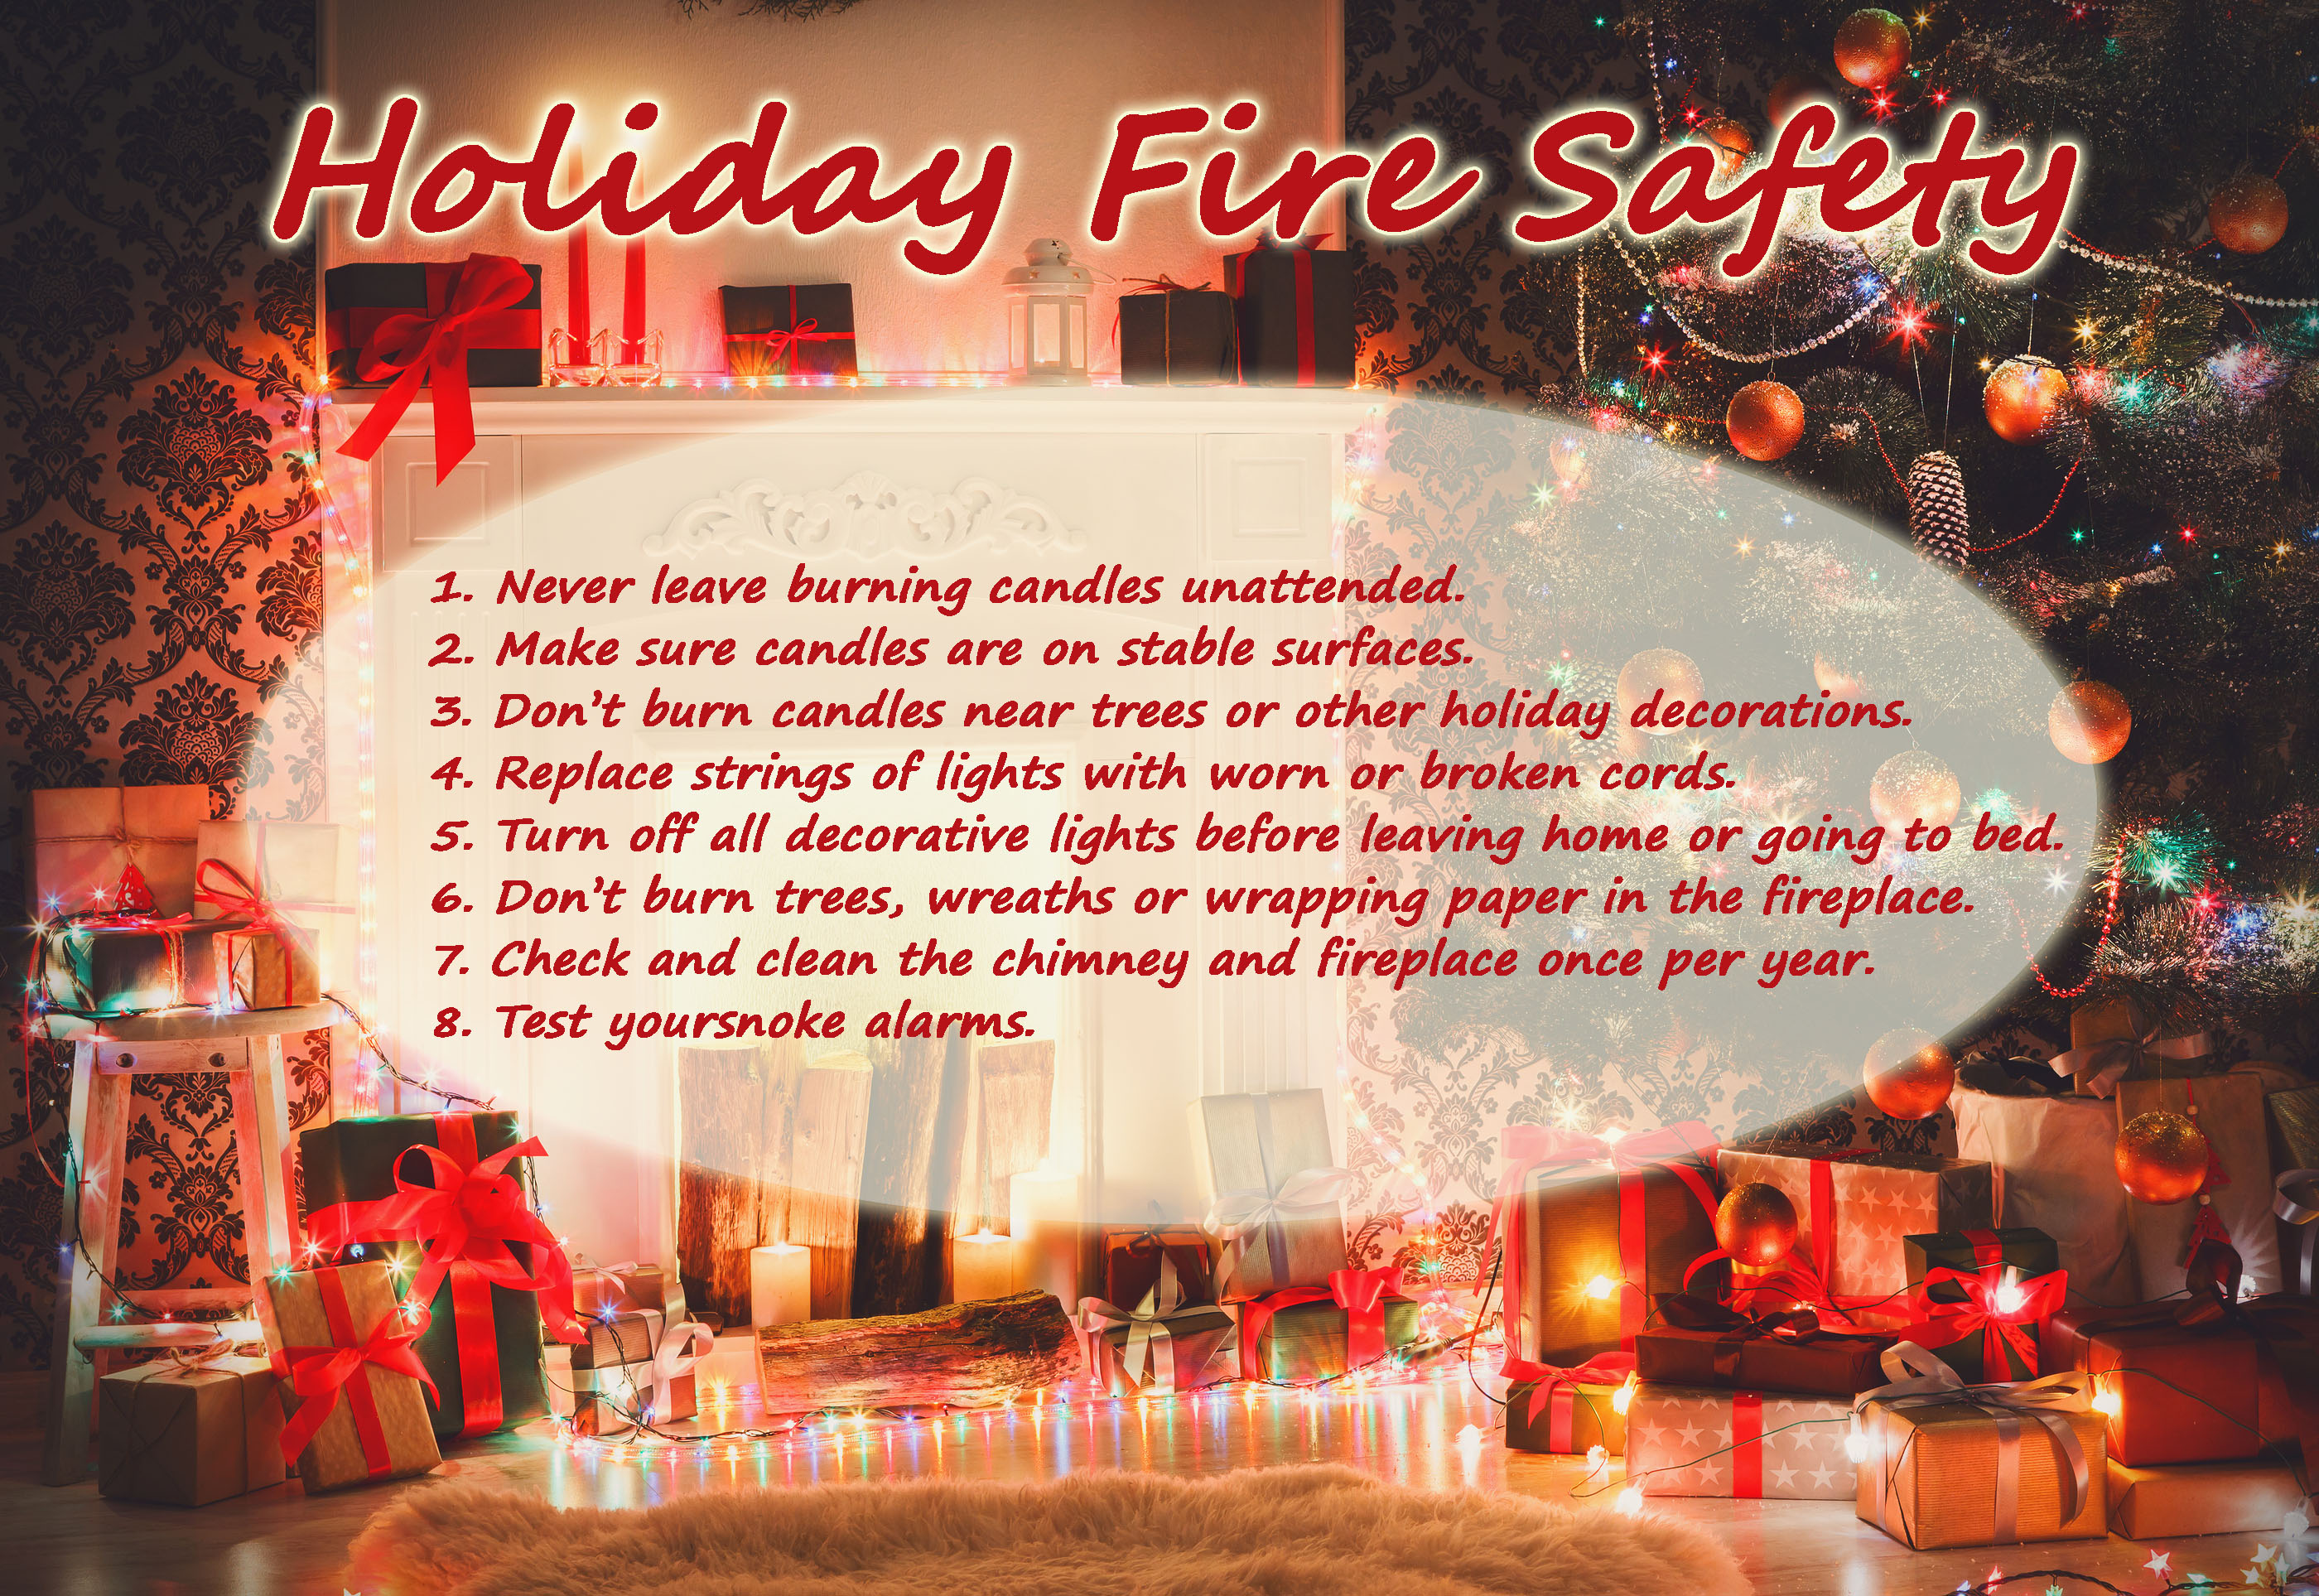 Holiday Fire Safety info-graphic